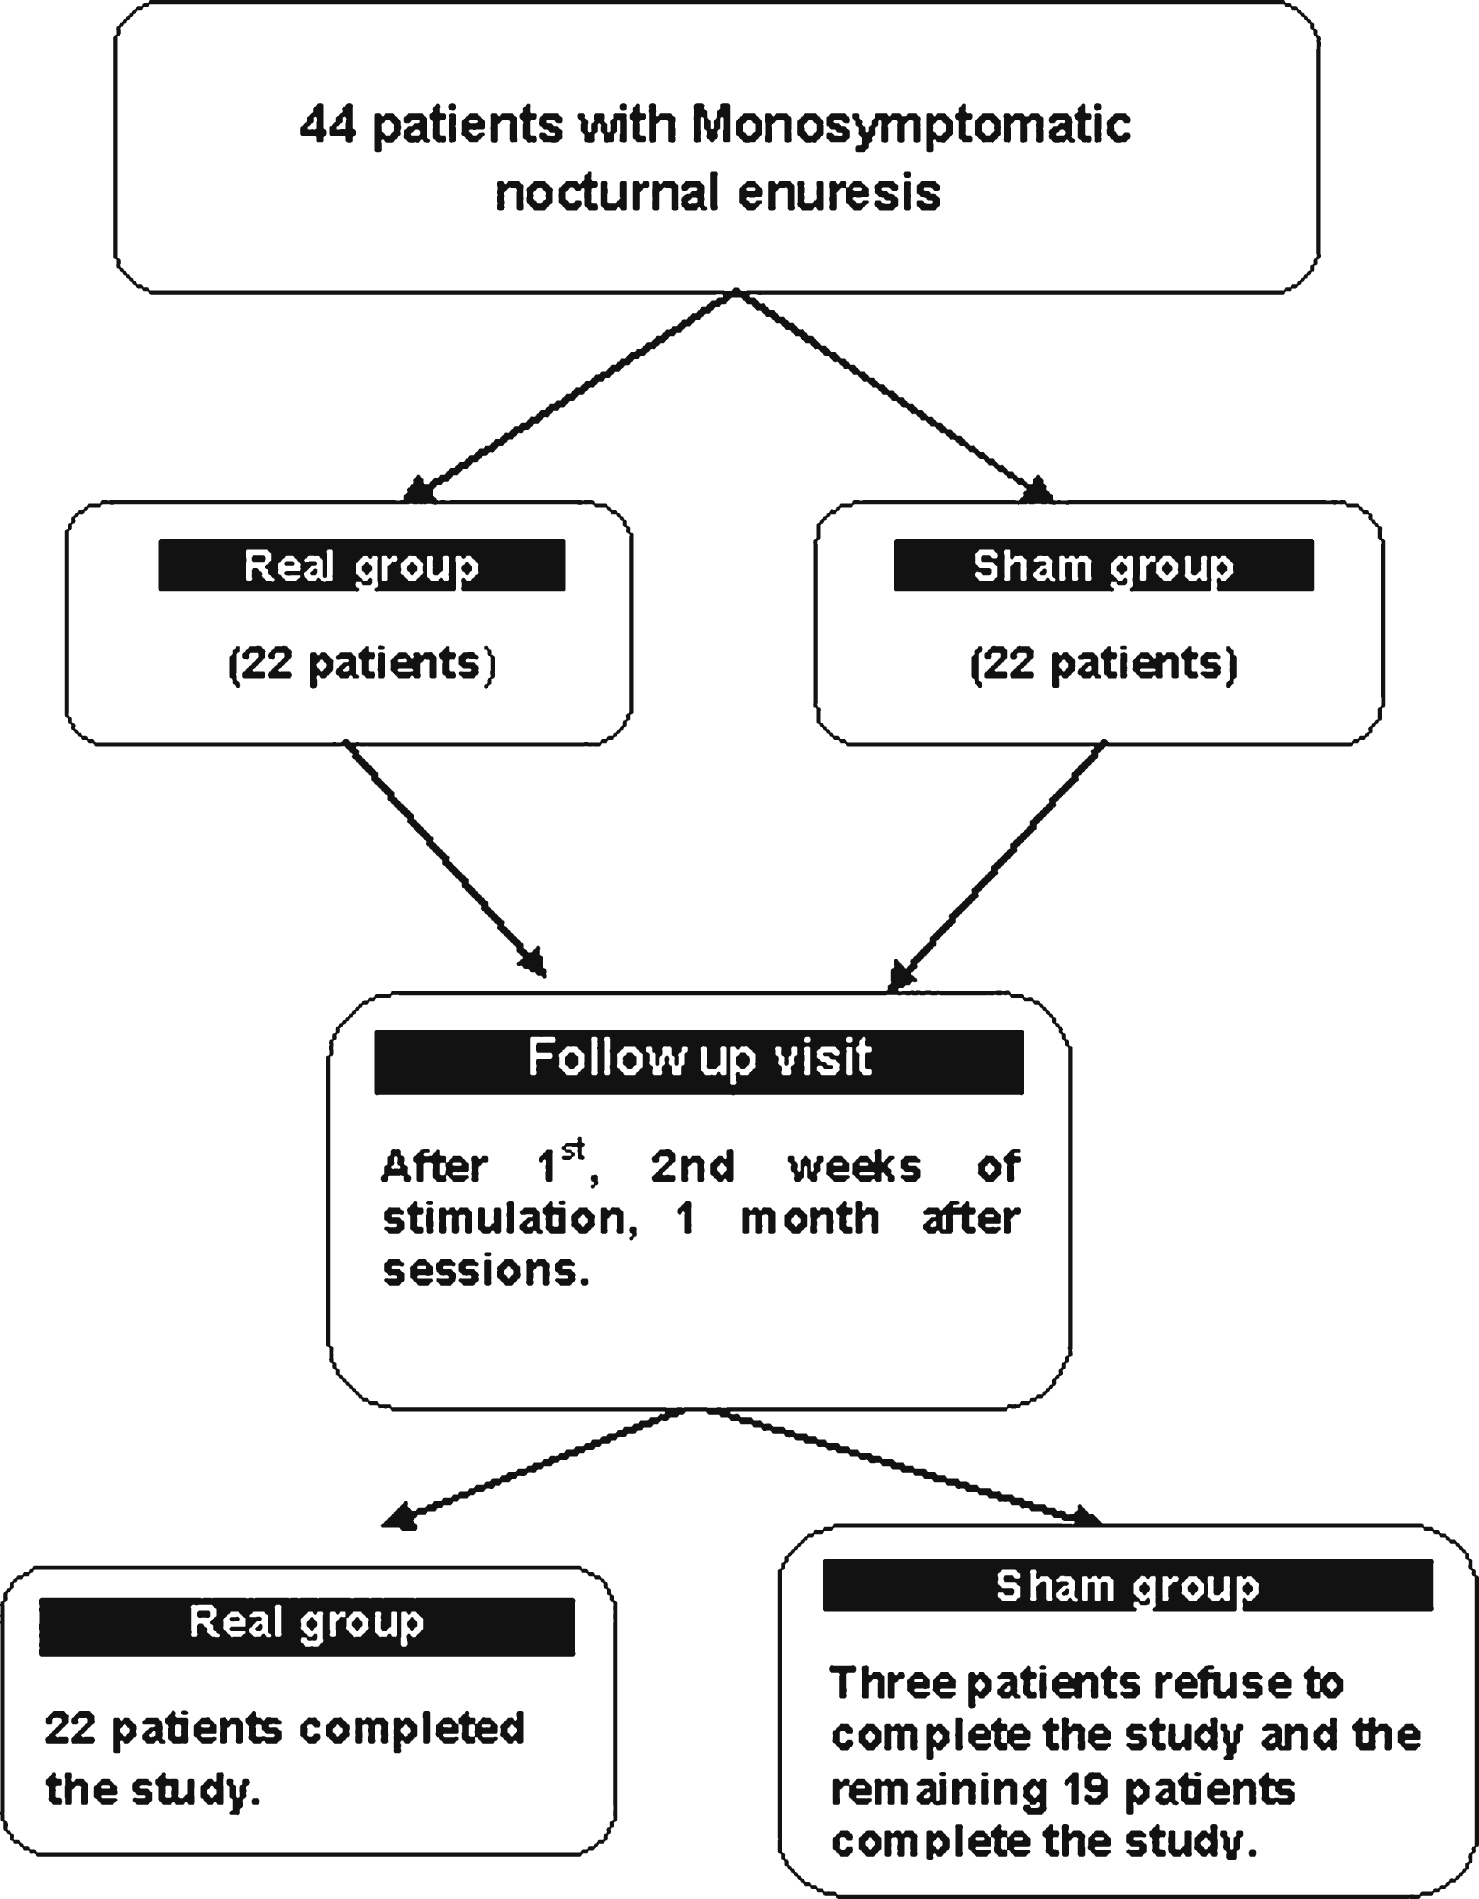 Flow chart of the patients through the course of the study.